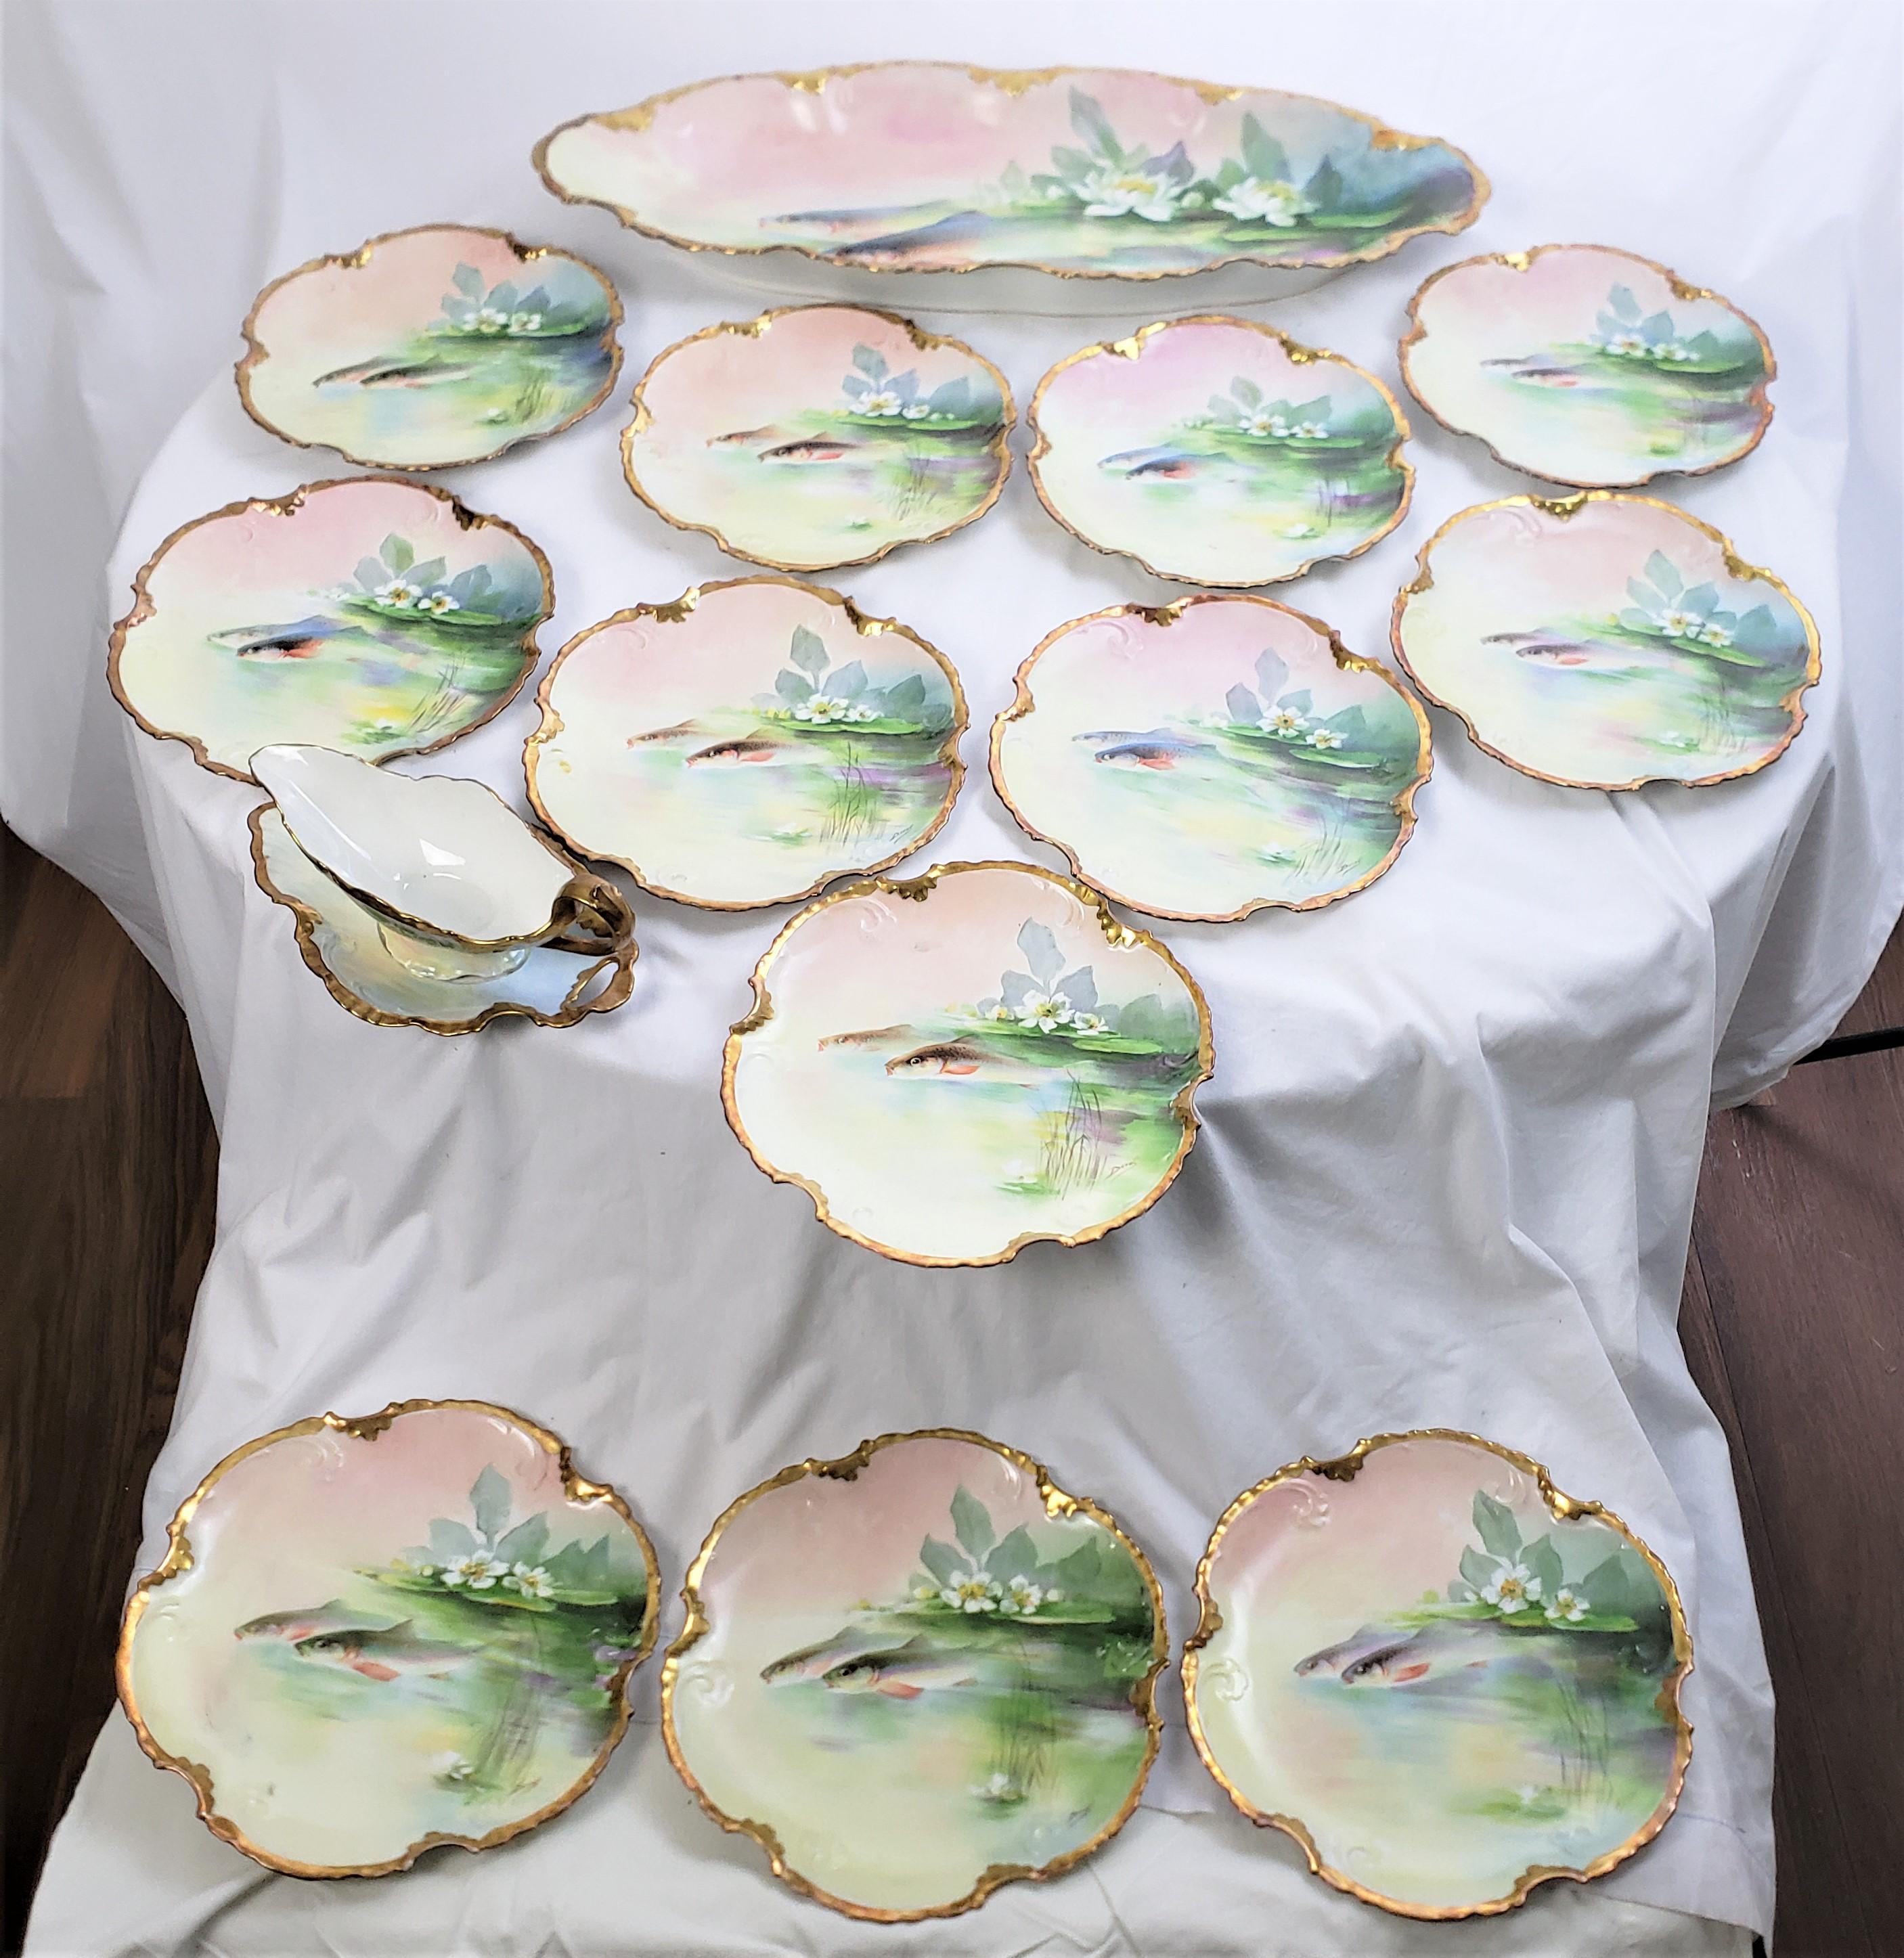 This antique fish serving set was made by the renowned Limoges factory of France in approximately 1880 in the period Late Victorian style. The set is composed of porcelain and consists of twelve scalloped plates, an extremely large serving platter